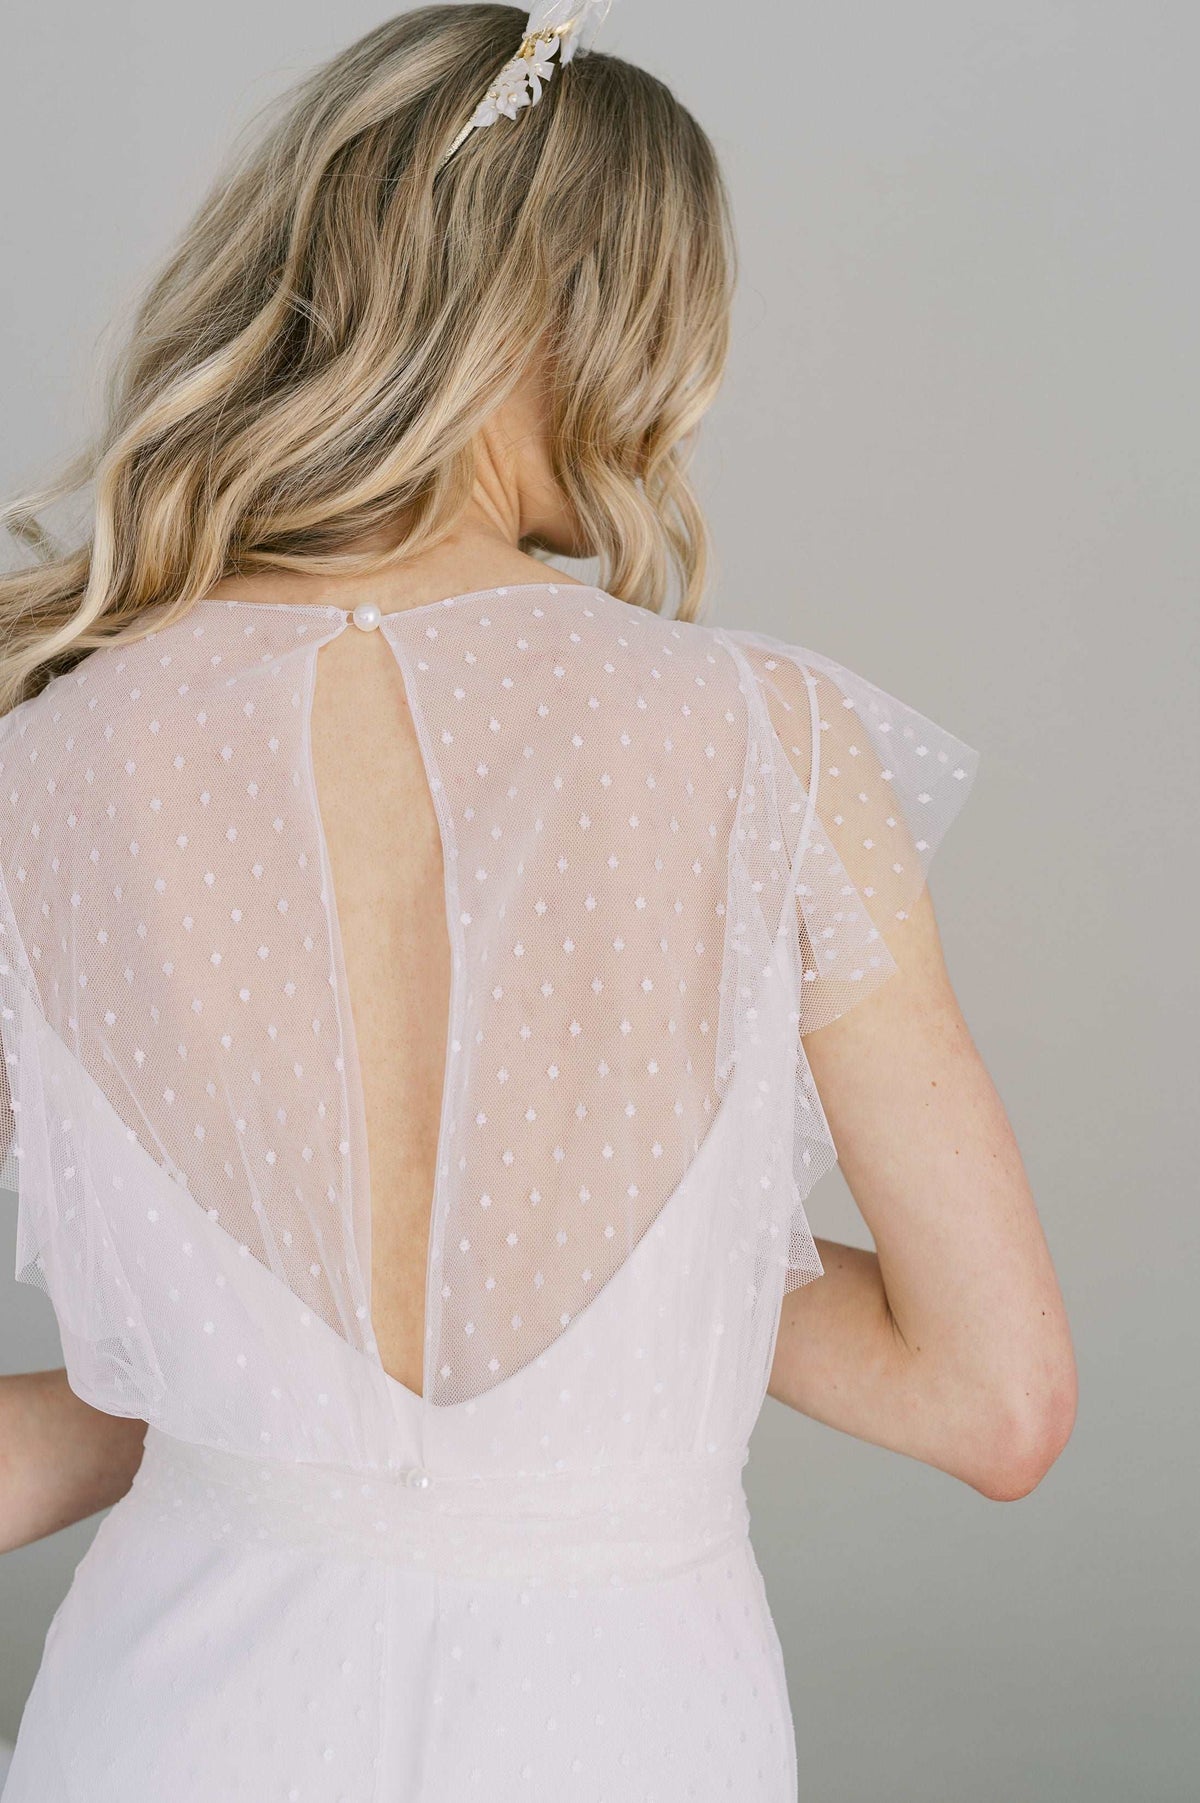 Whimsical and romantic dotted tulle wedding dress. Nostalgic ruffles cascade down the front and back.Shown with a simple slip dress lining. Designed by Catherine Langlois, Canada.